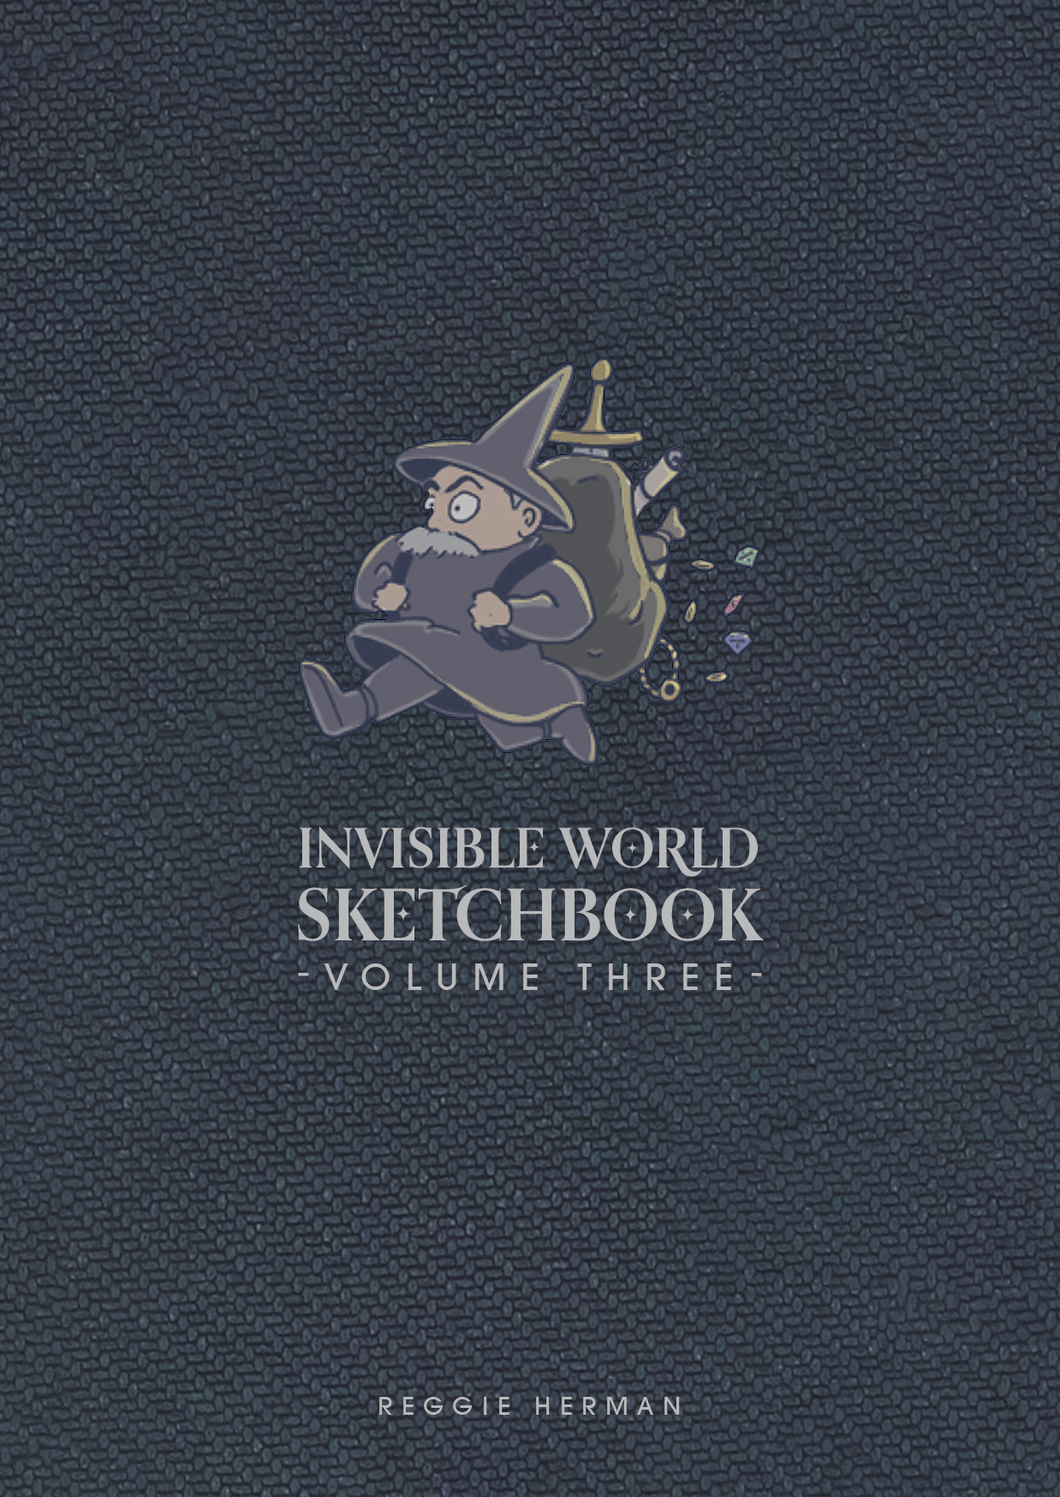 Invisible World Sketchbook - Volume Three